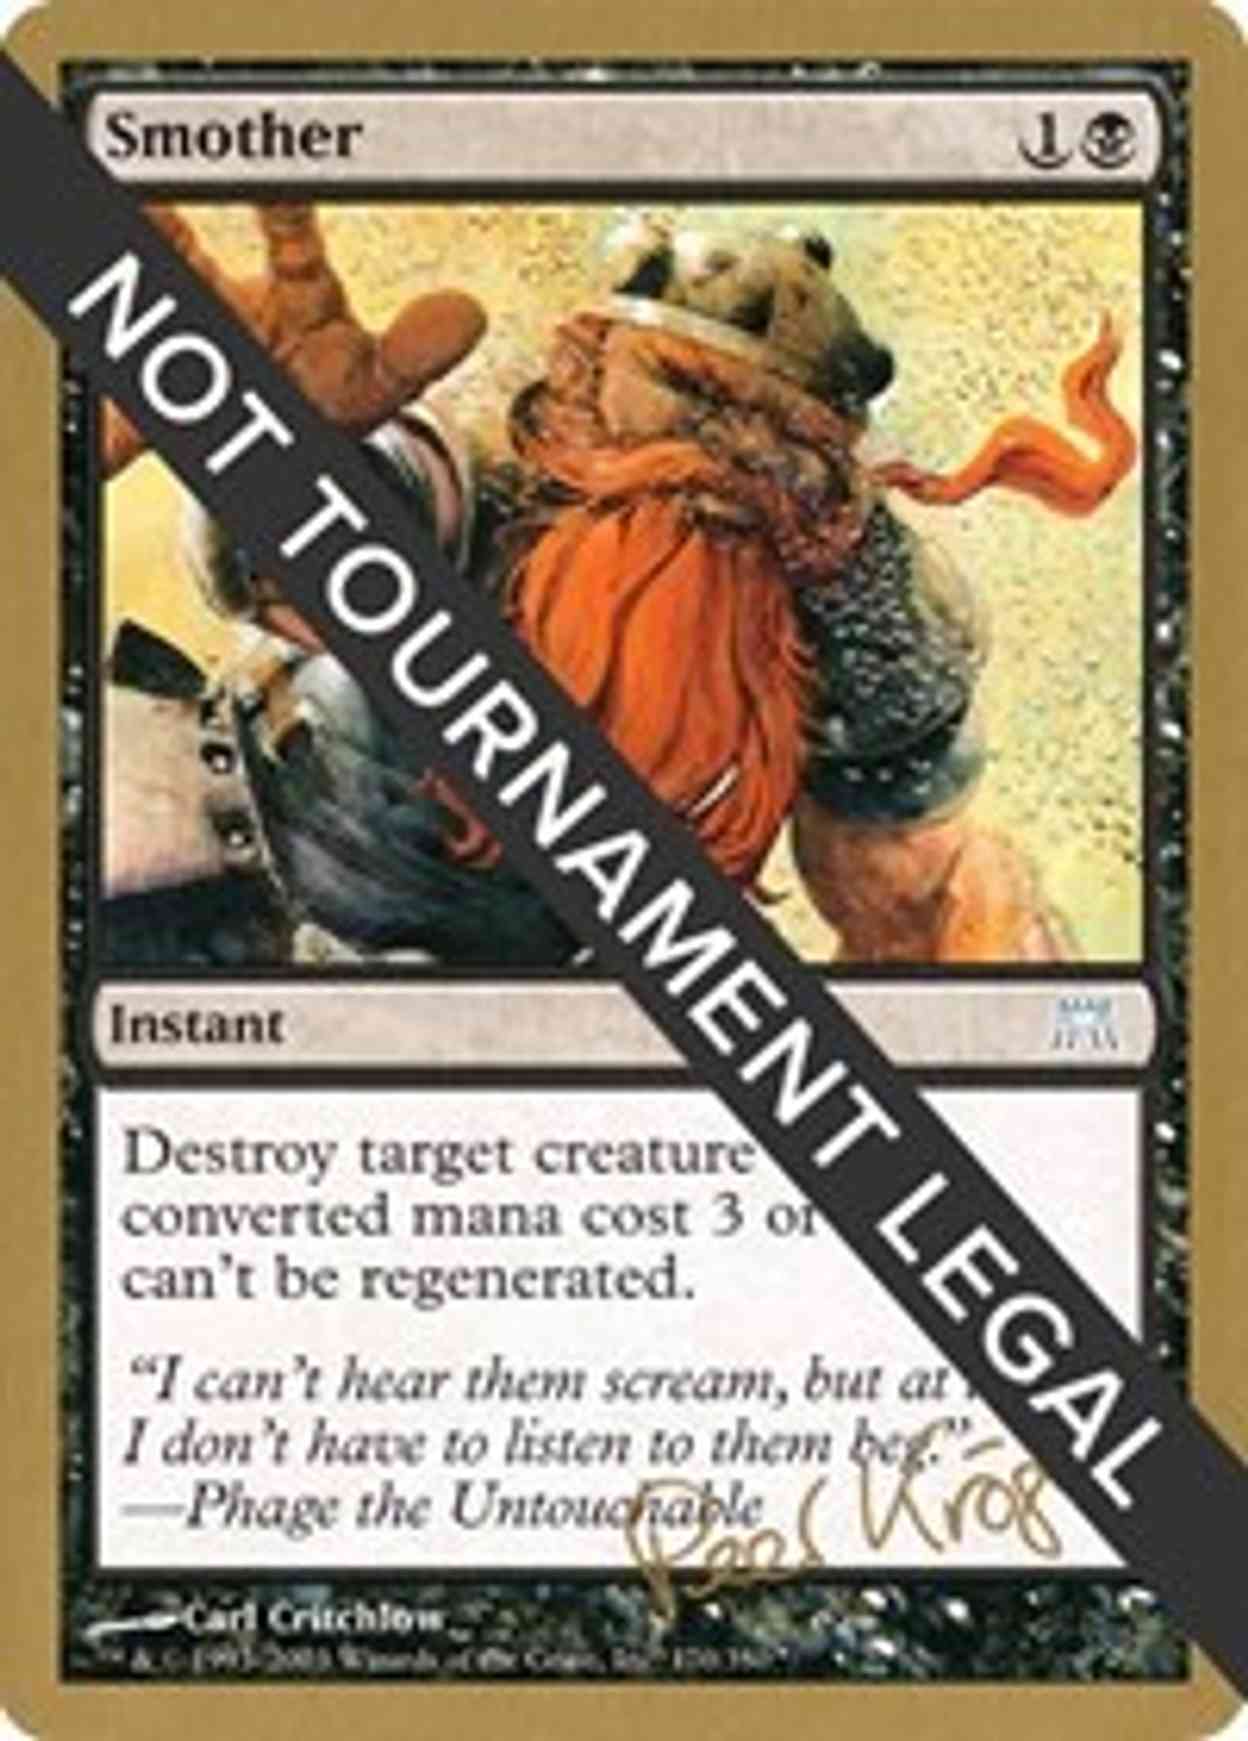 Smother - 2003 Peer Kroger (ONS) magic card front